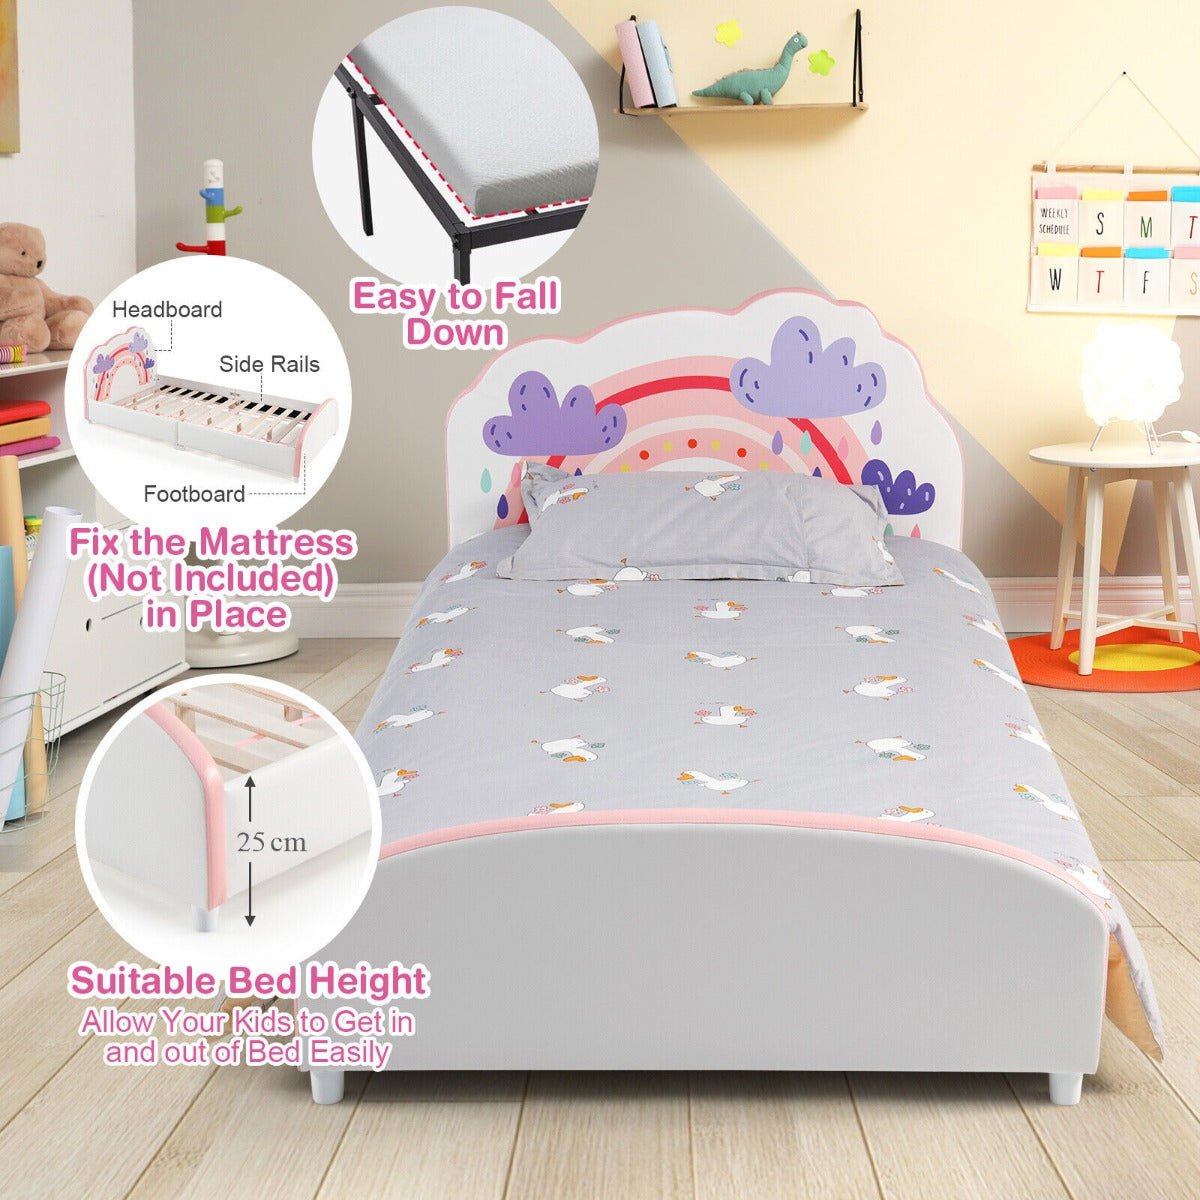 Comfortable Single Wooden Bed for Kids